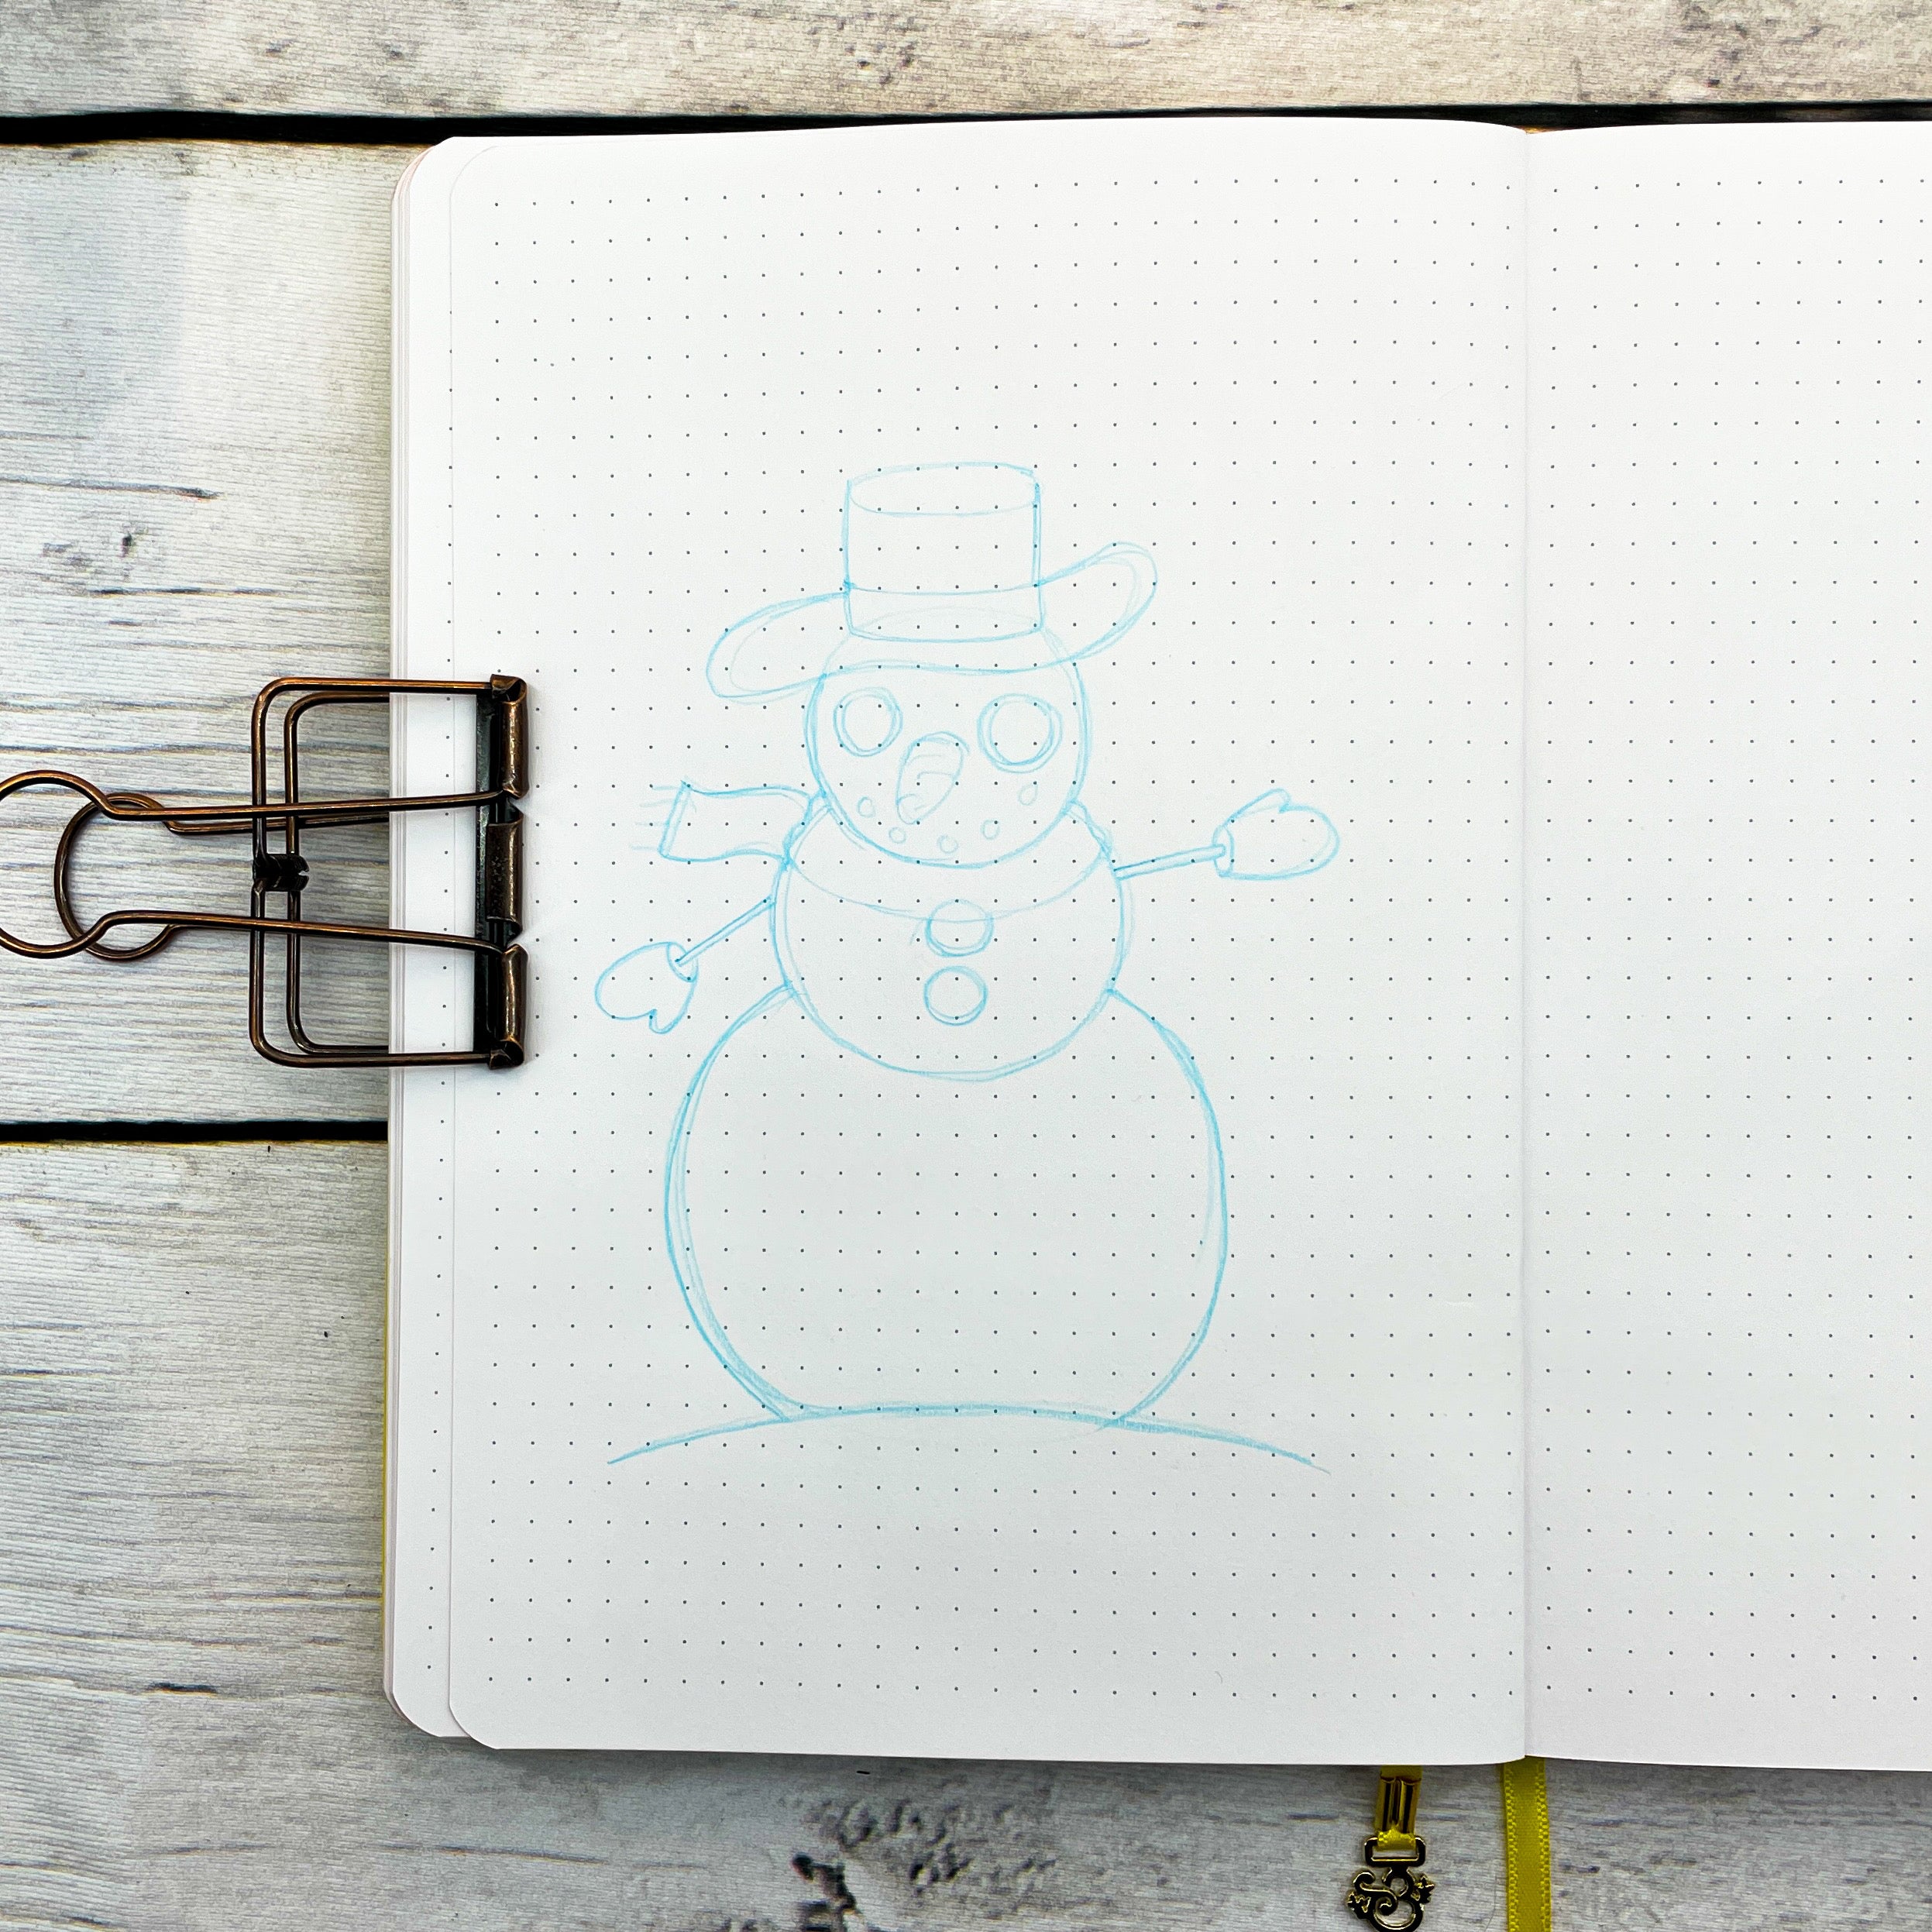 photo of a sketch of a snowman using blue lead